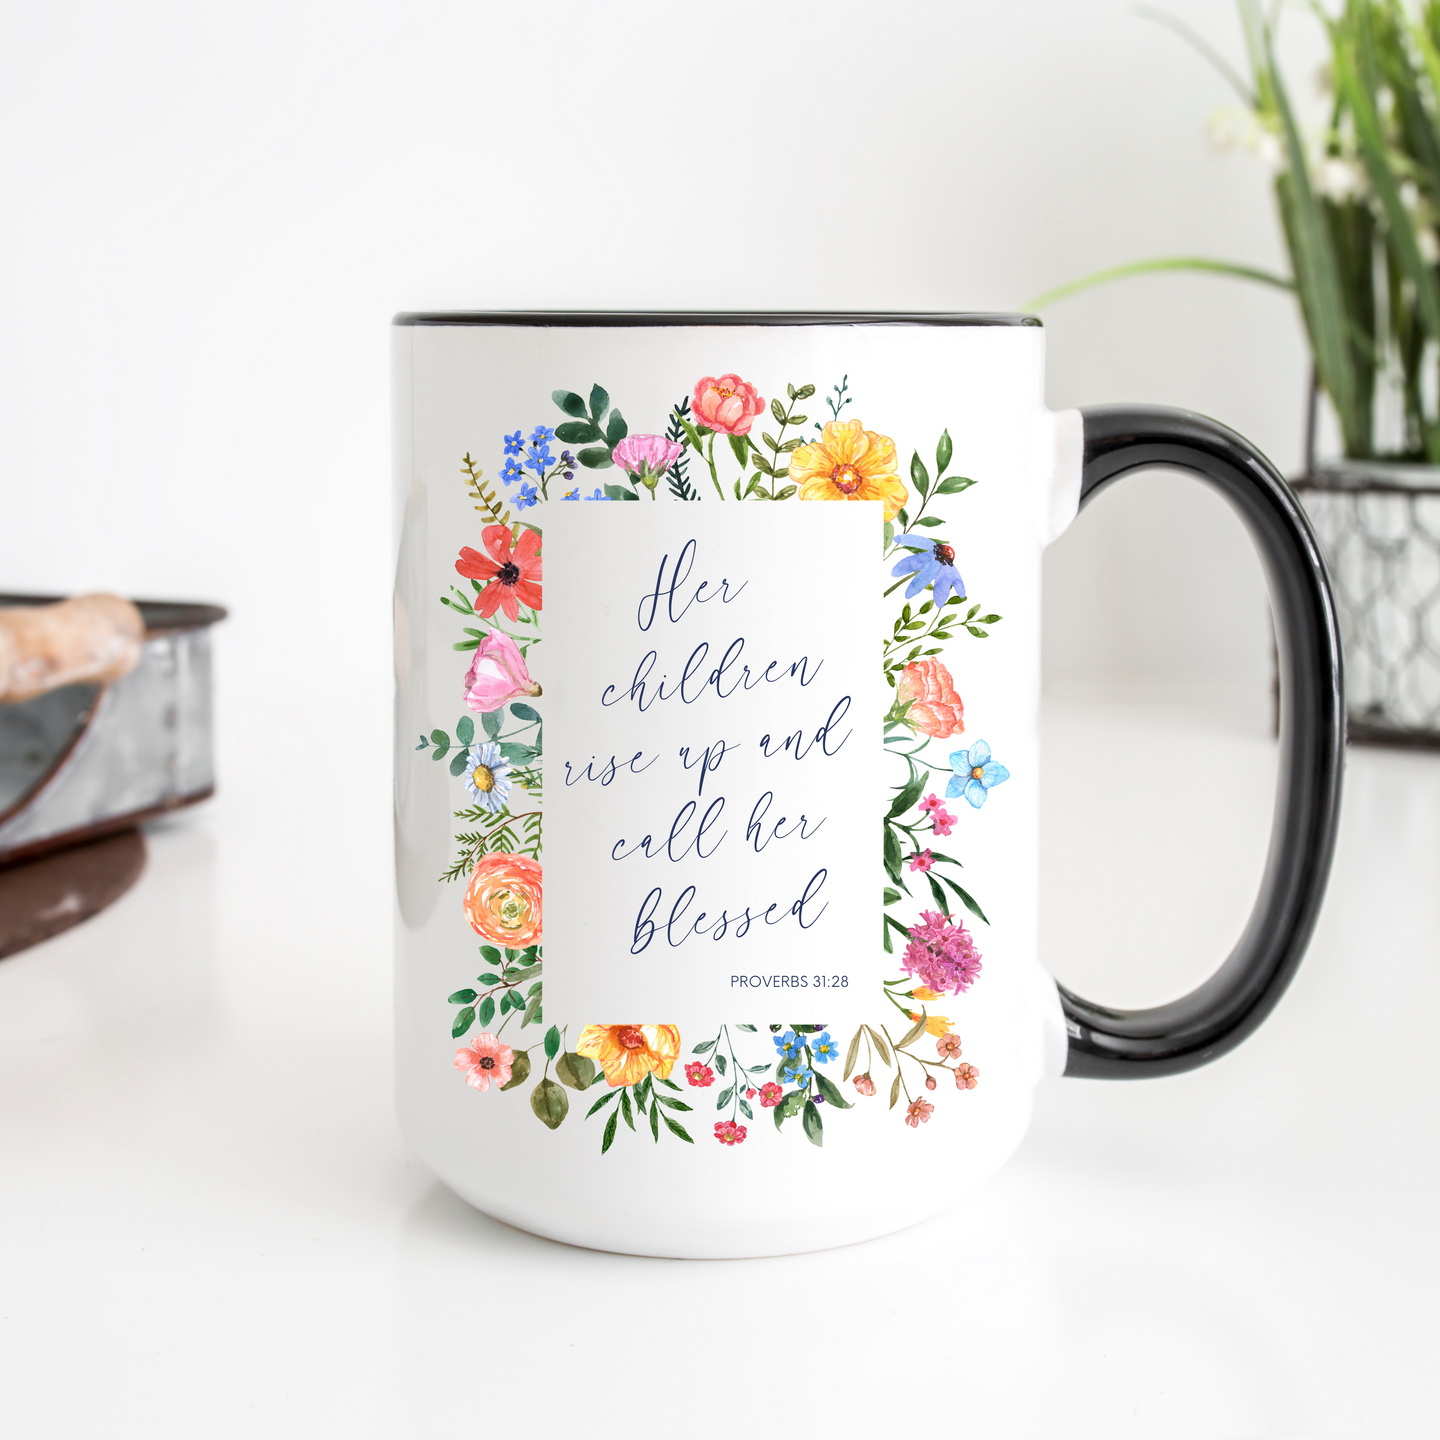 Her Children Rise Up And Call Her Blessed - 15oz Ceramic Mug